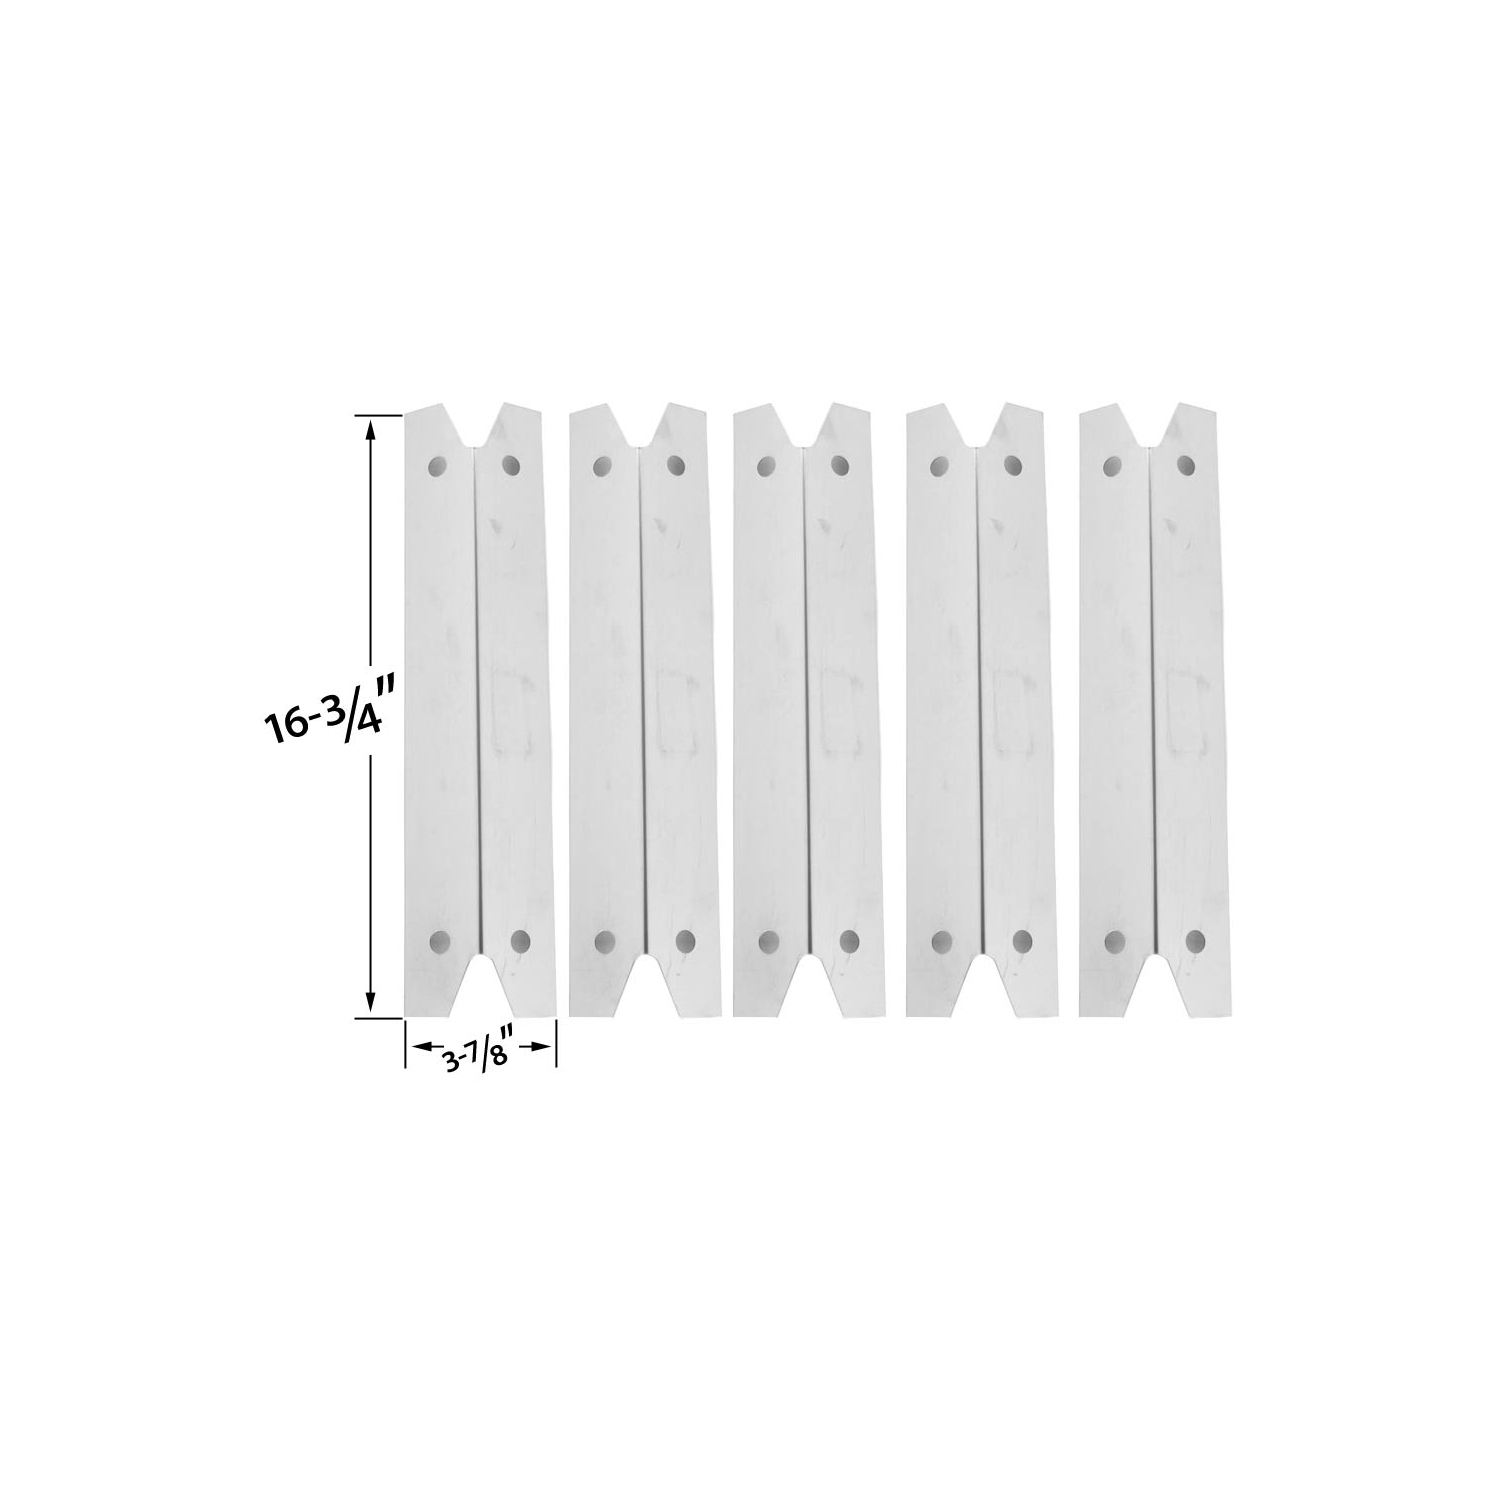 Replacement Heat Plate For Brinkmann 810-8533-F, Charmglow, GR3055-014684, Grill Chef, & Member's Mark Models - 5PK